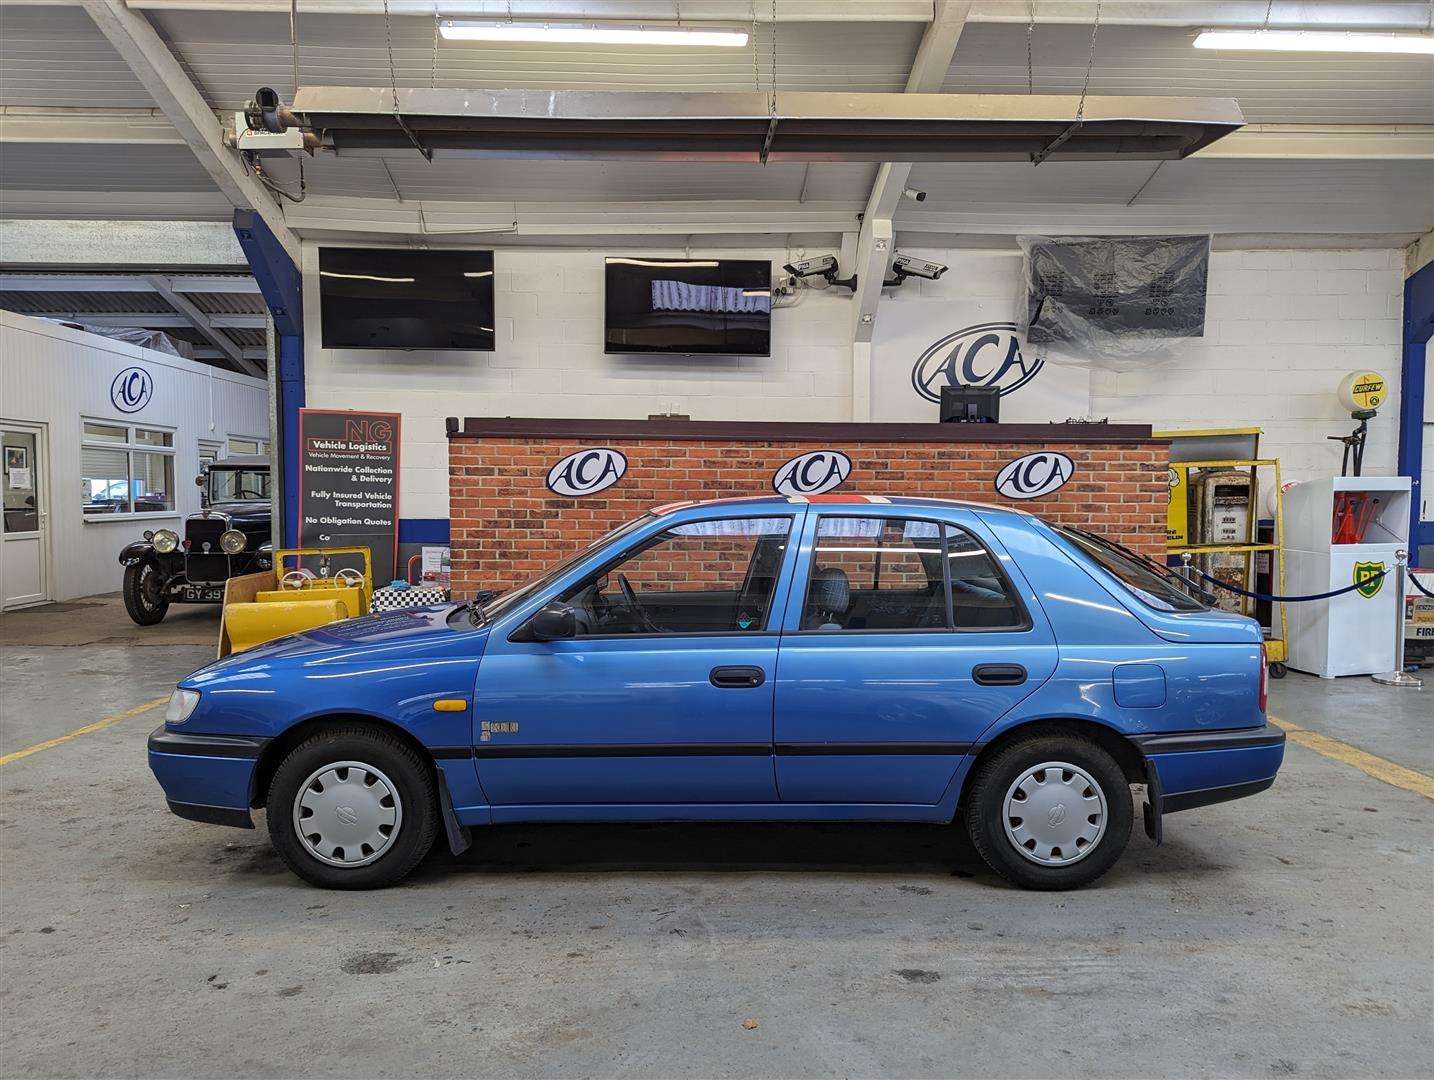 1995 NISSAN SUNNY SEQUEL - Image 2 of 25